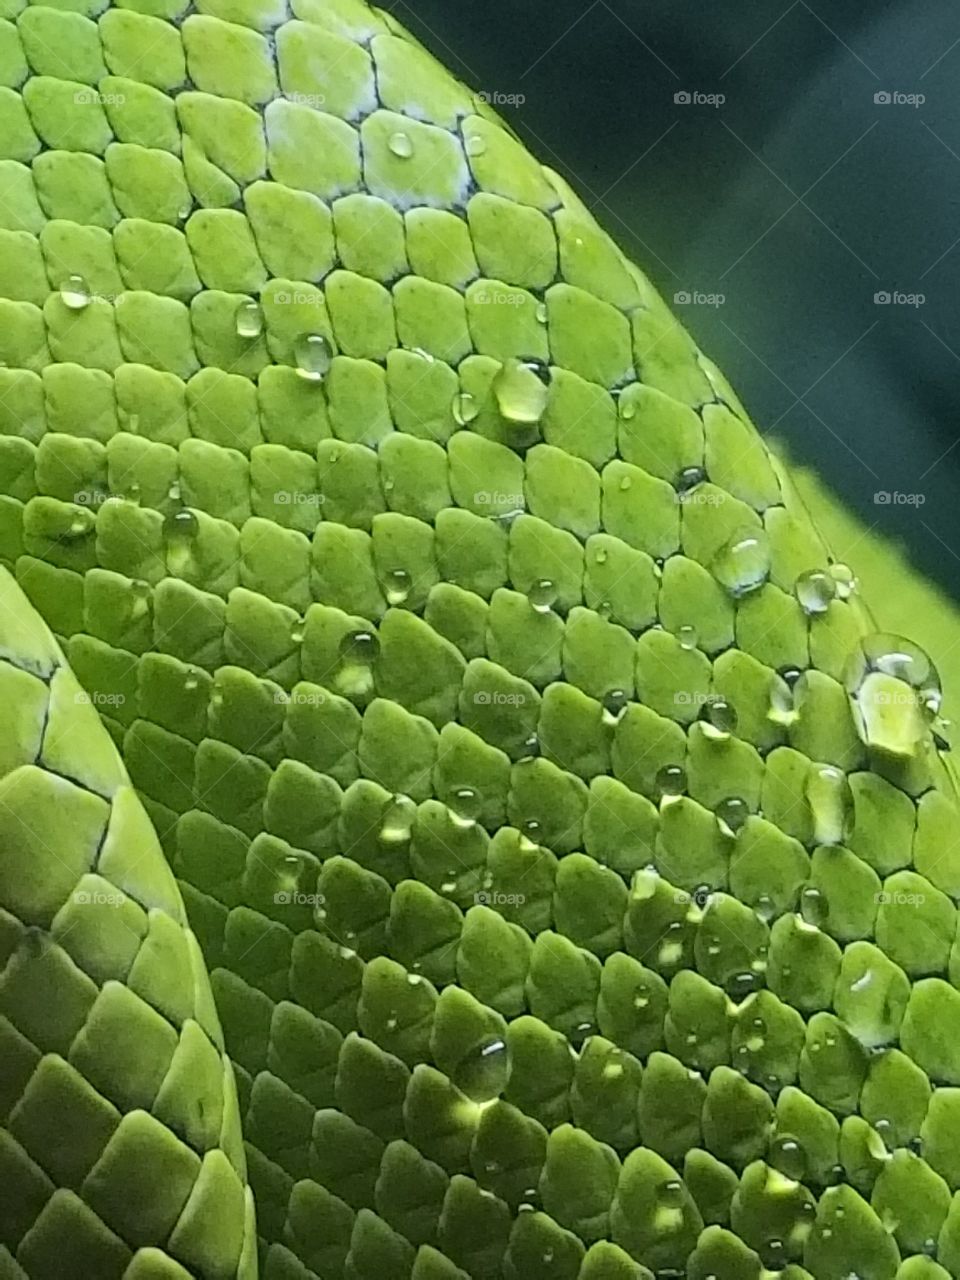 Water droplets on a green snake